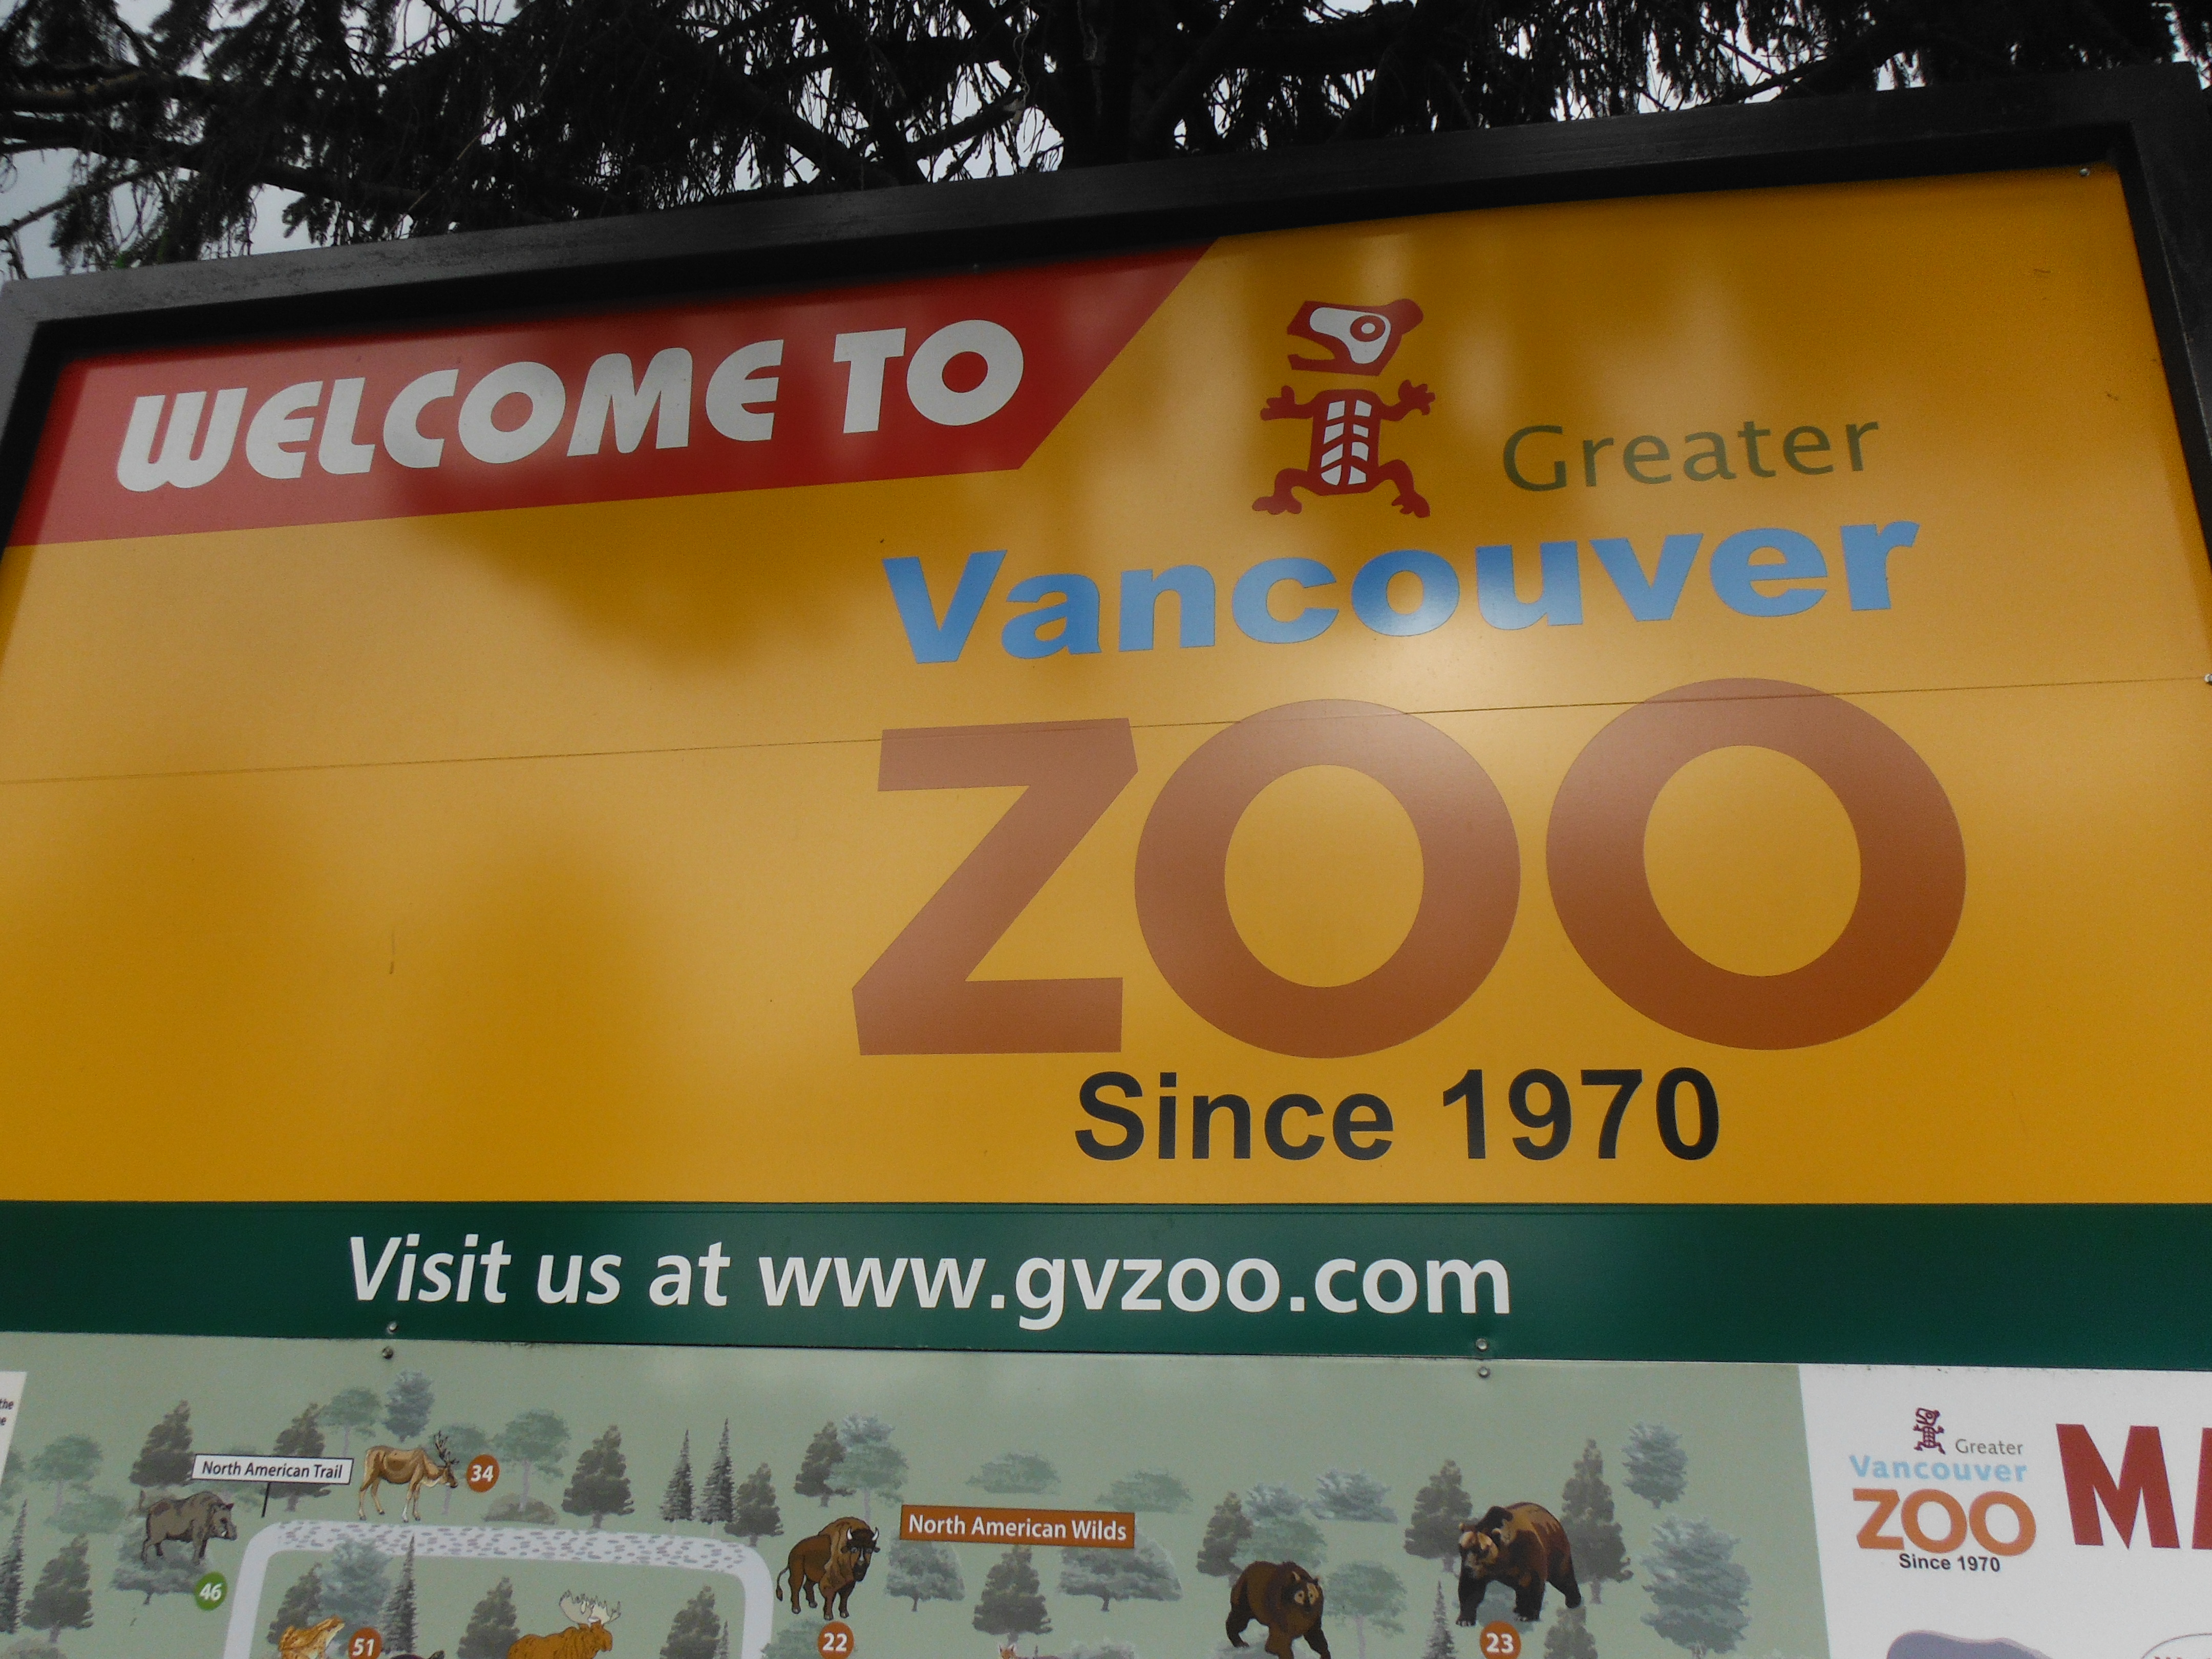 Greater Vancouver Zoo Pics #BeHere